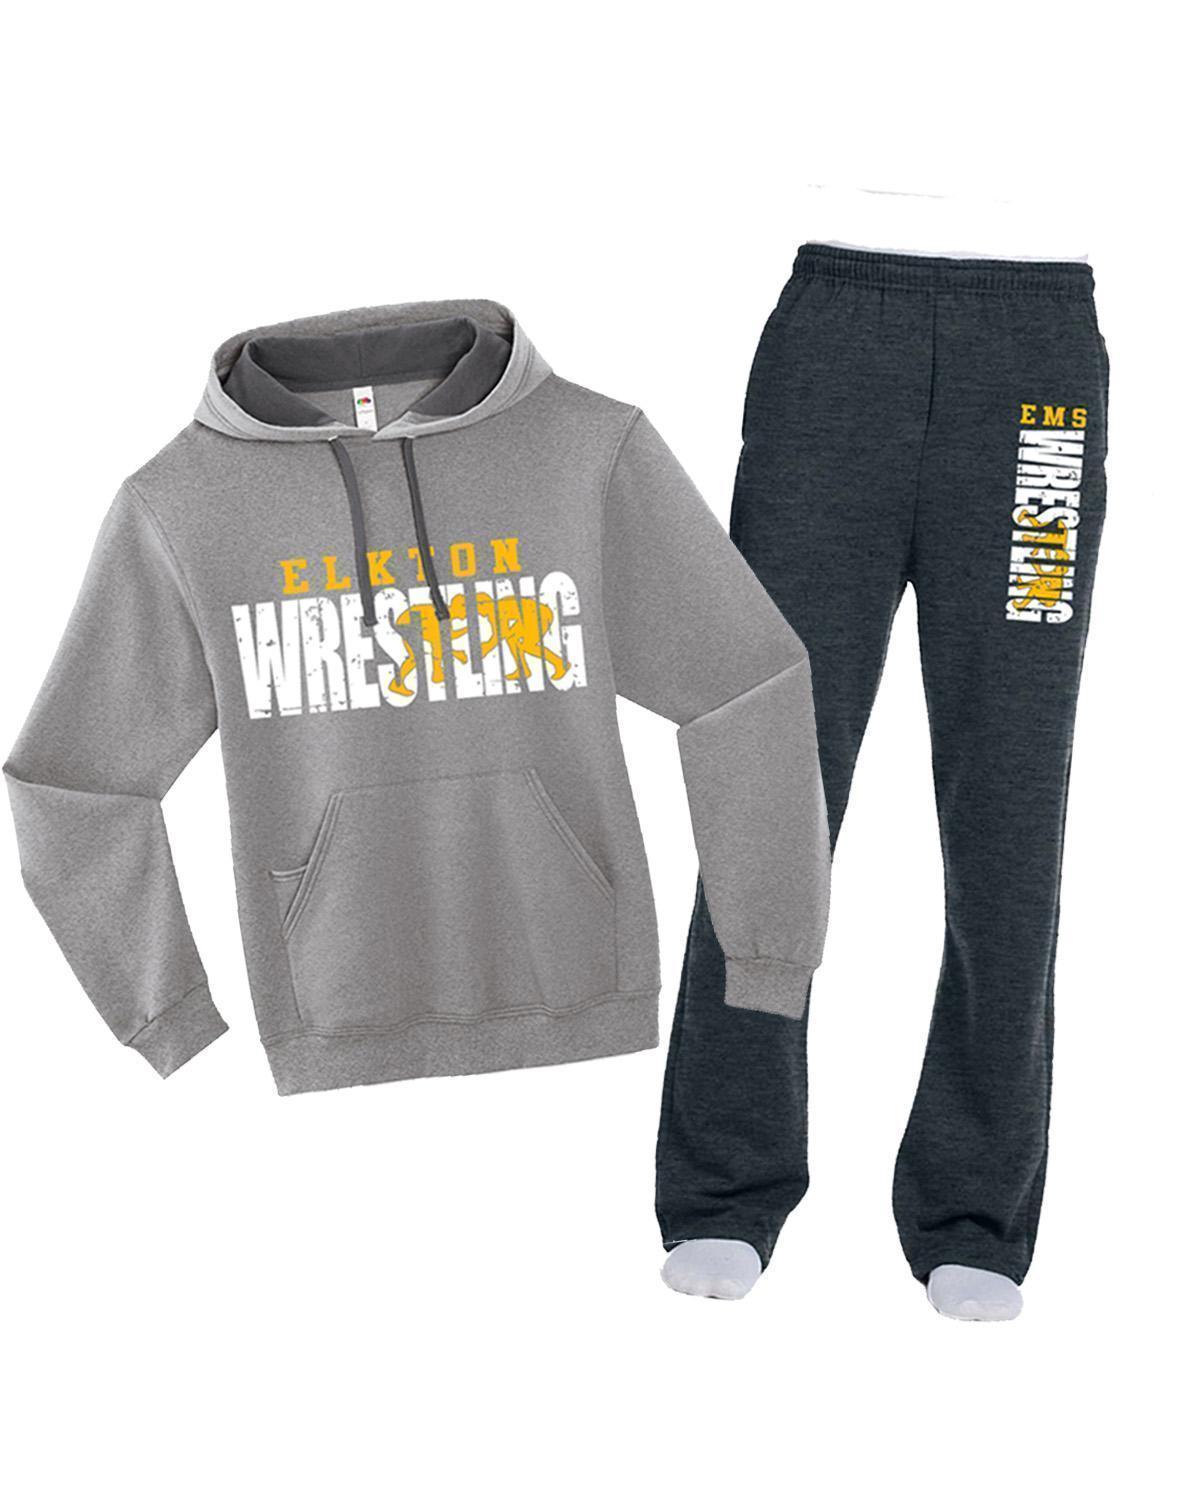 Adult size - Sweatpants/Grey Hoodie Combo  ($60/bundle - MUST PURCHASE BOTH FOR DISCOUNT) 